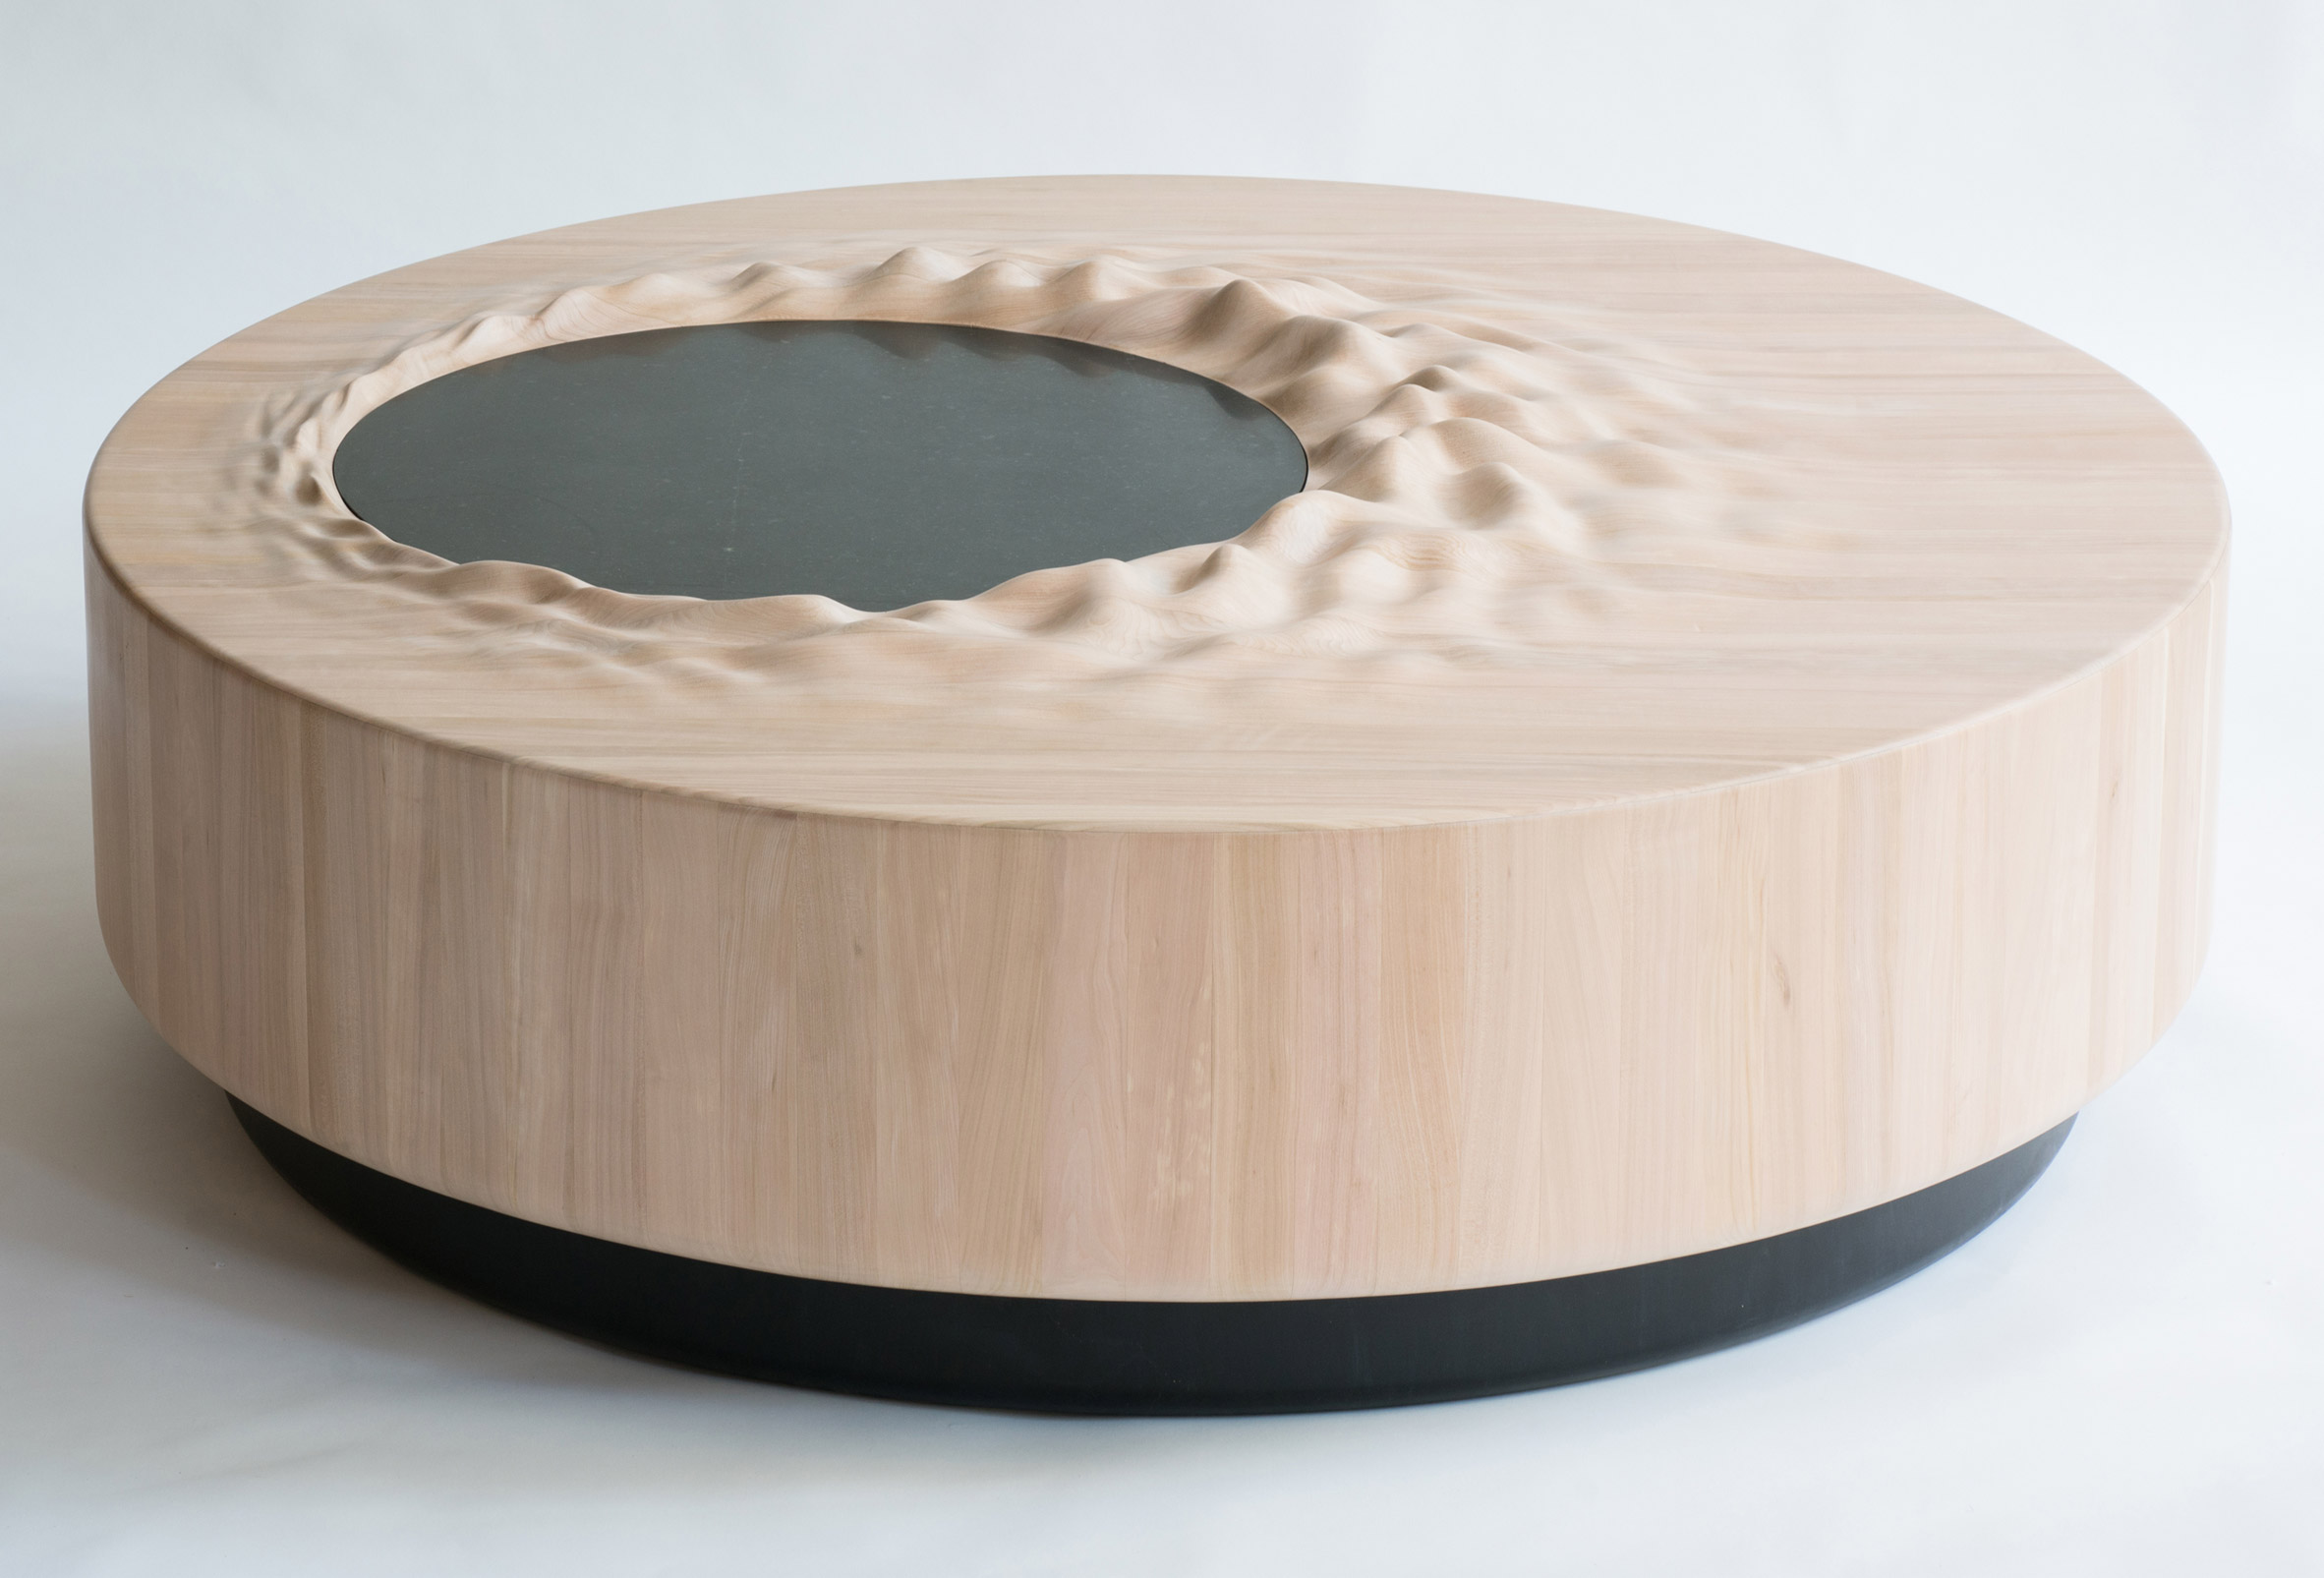 GT2P's Manufactured Landscapes exhibition features rippled coffee table